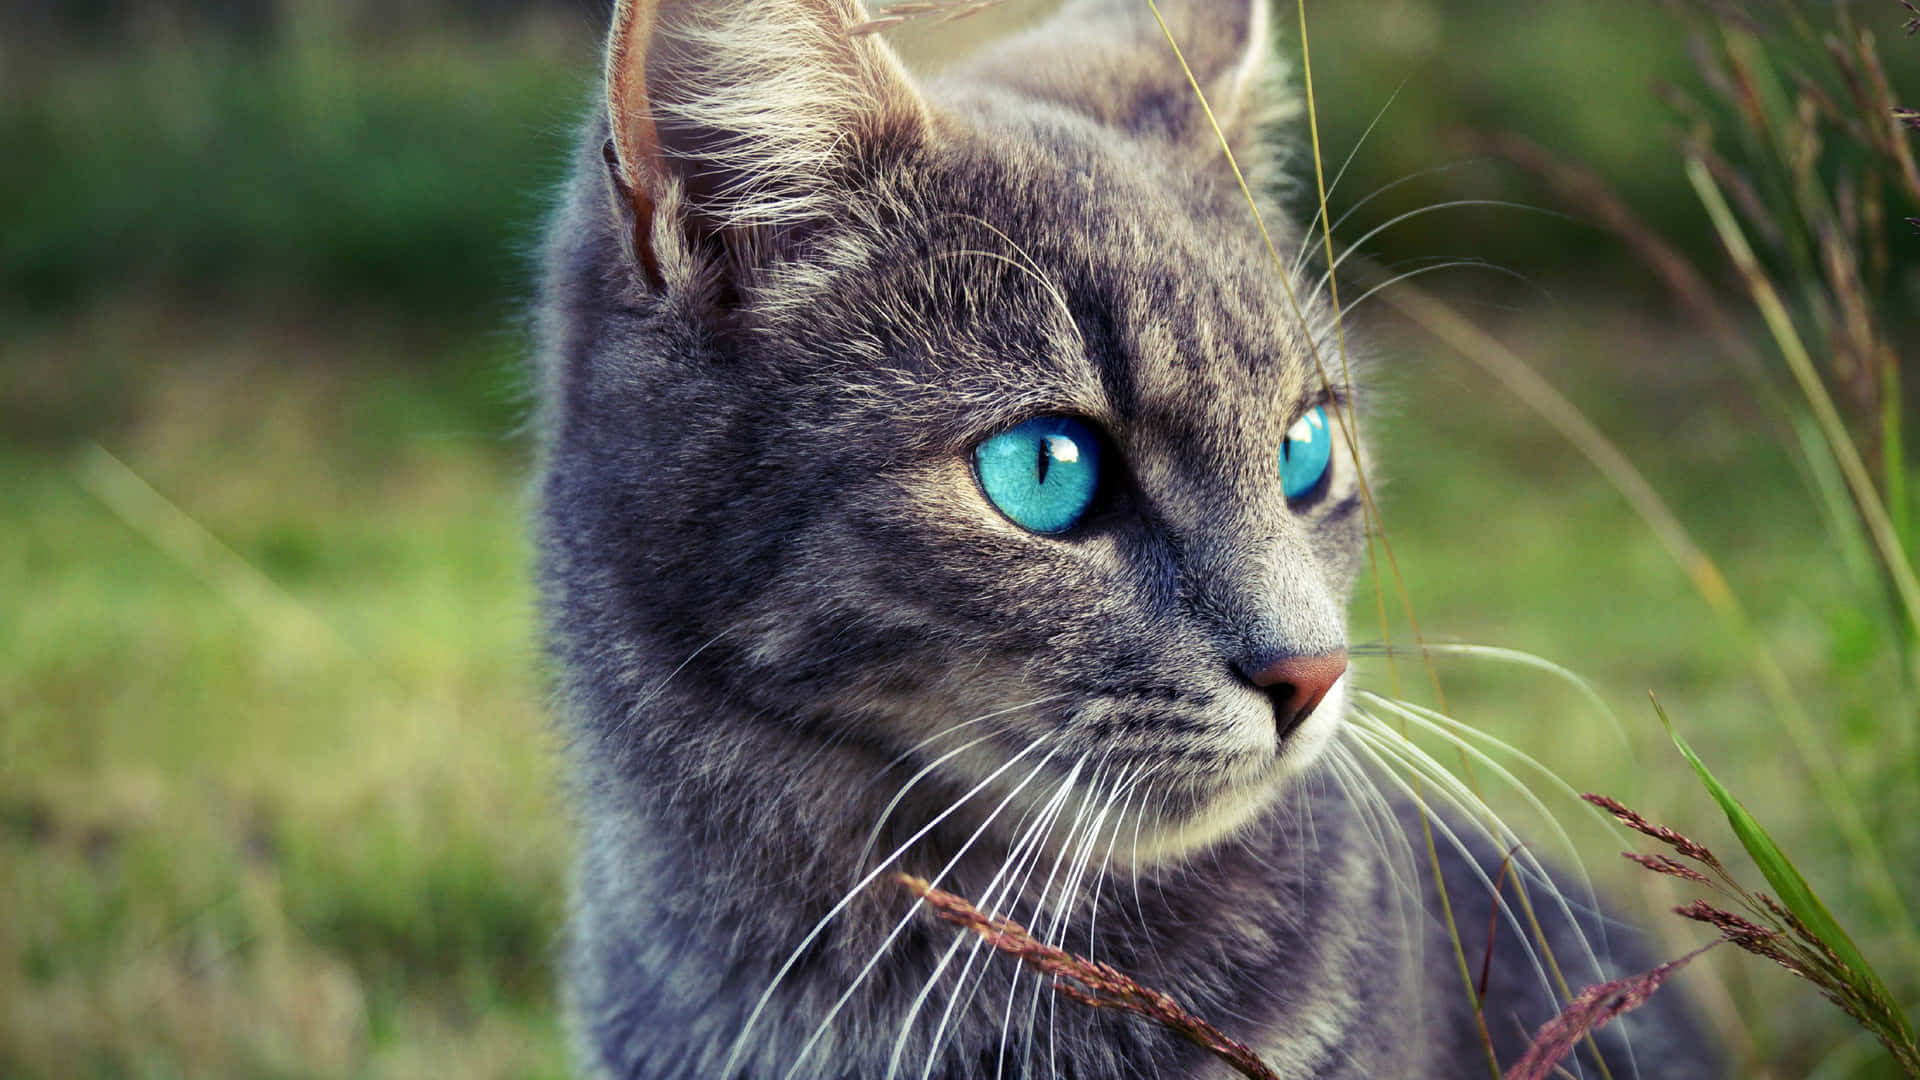 Beautiful Ojos Azules Cat with blue eyes gazing intently Wallpaper